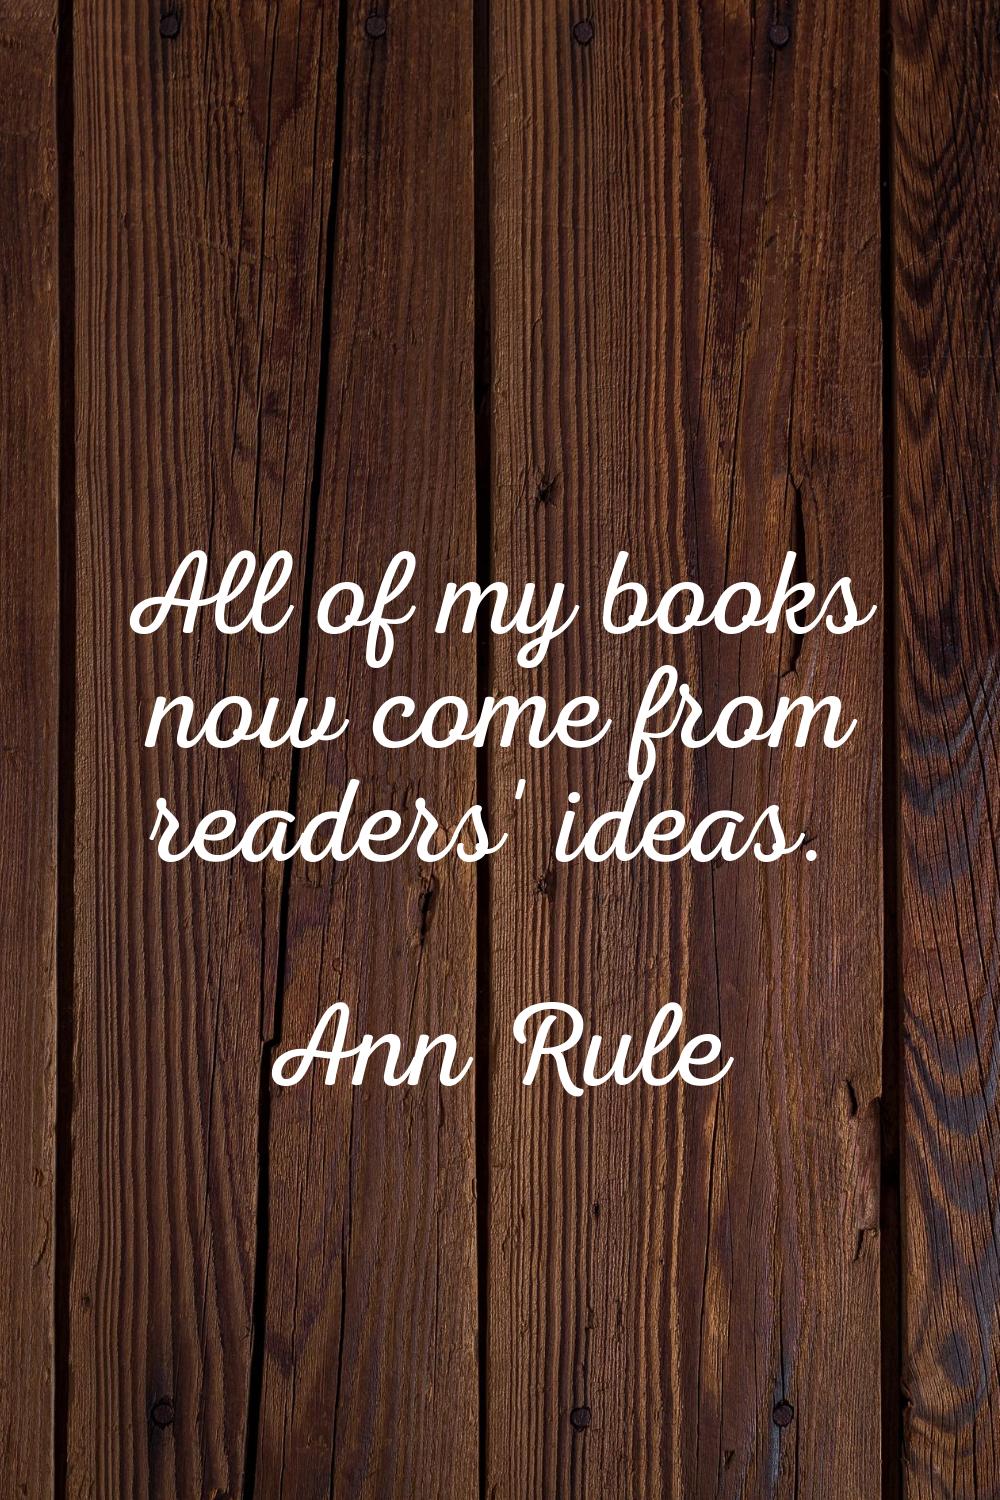 All of my books now come from readers' ideas.